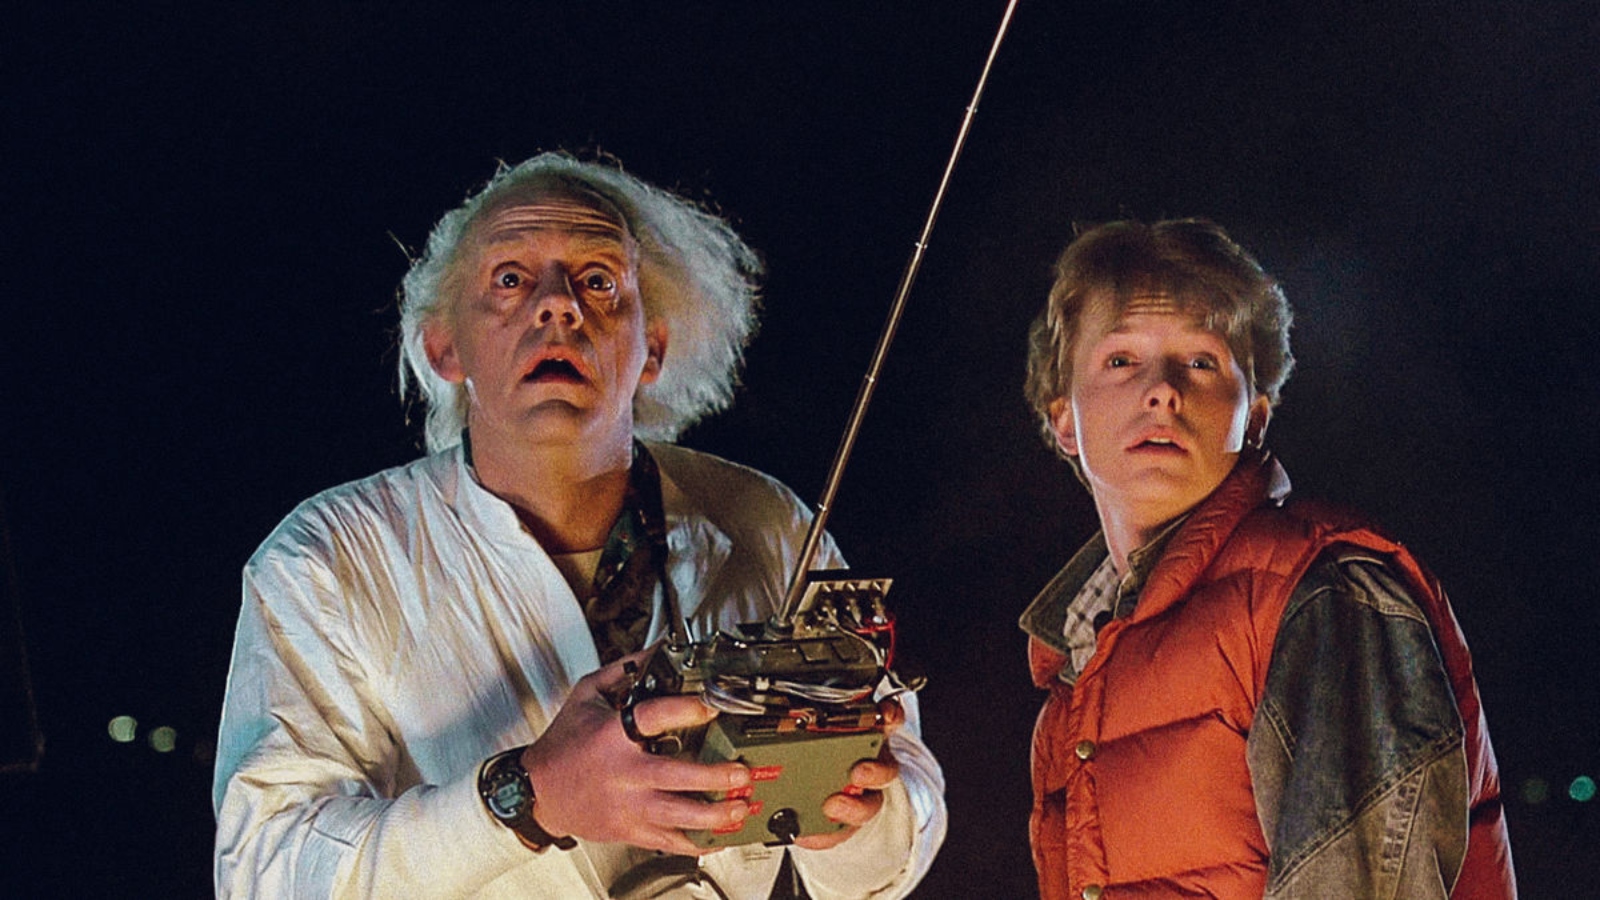 10 best time travel movies of all time, ranked